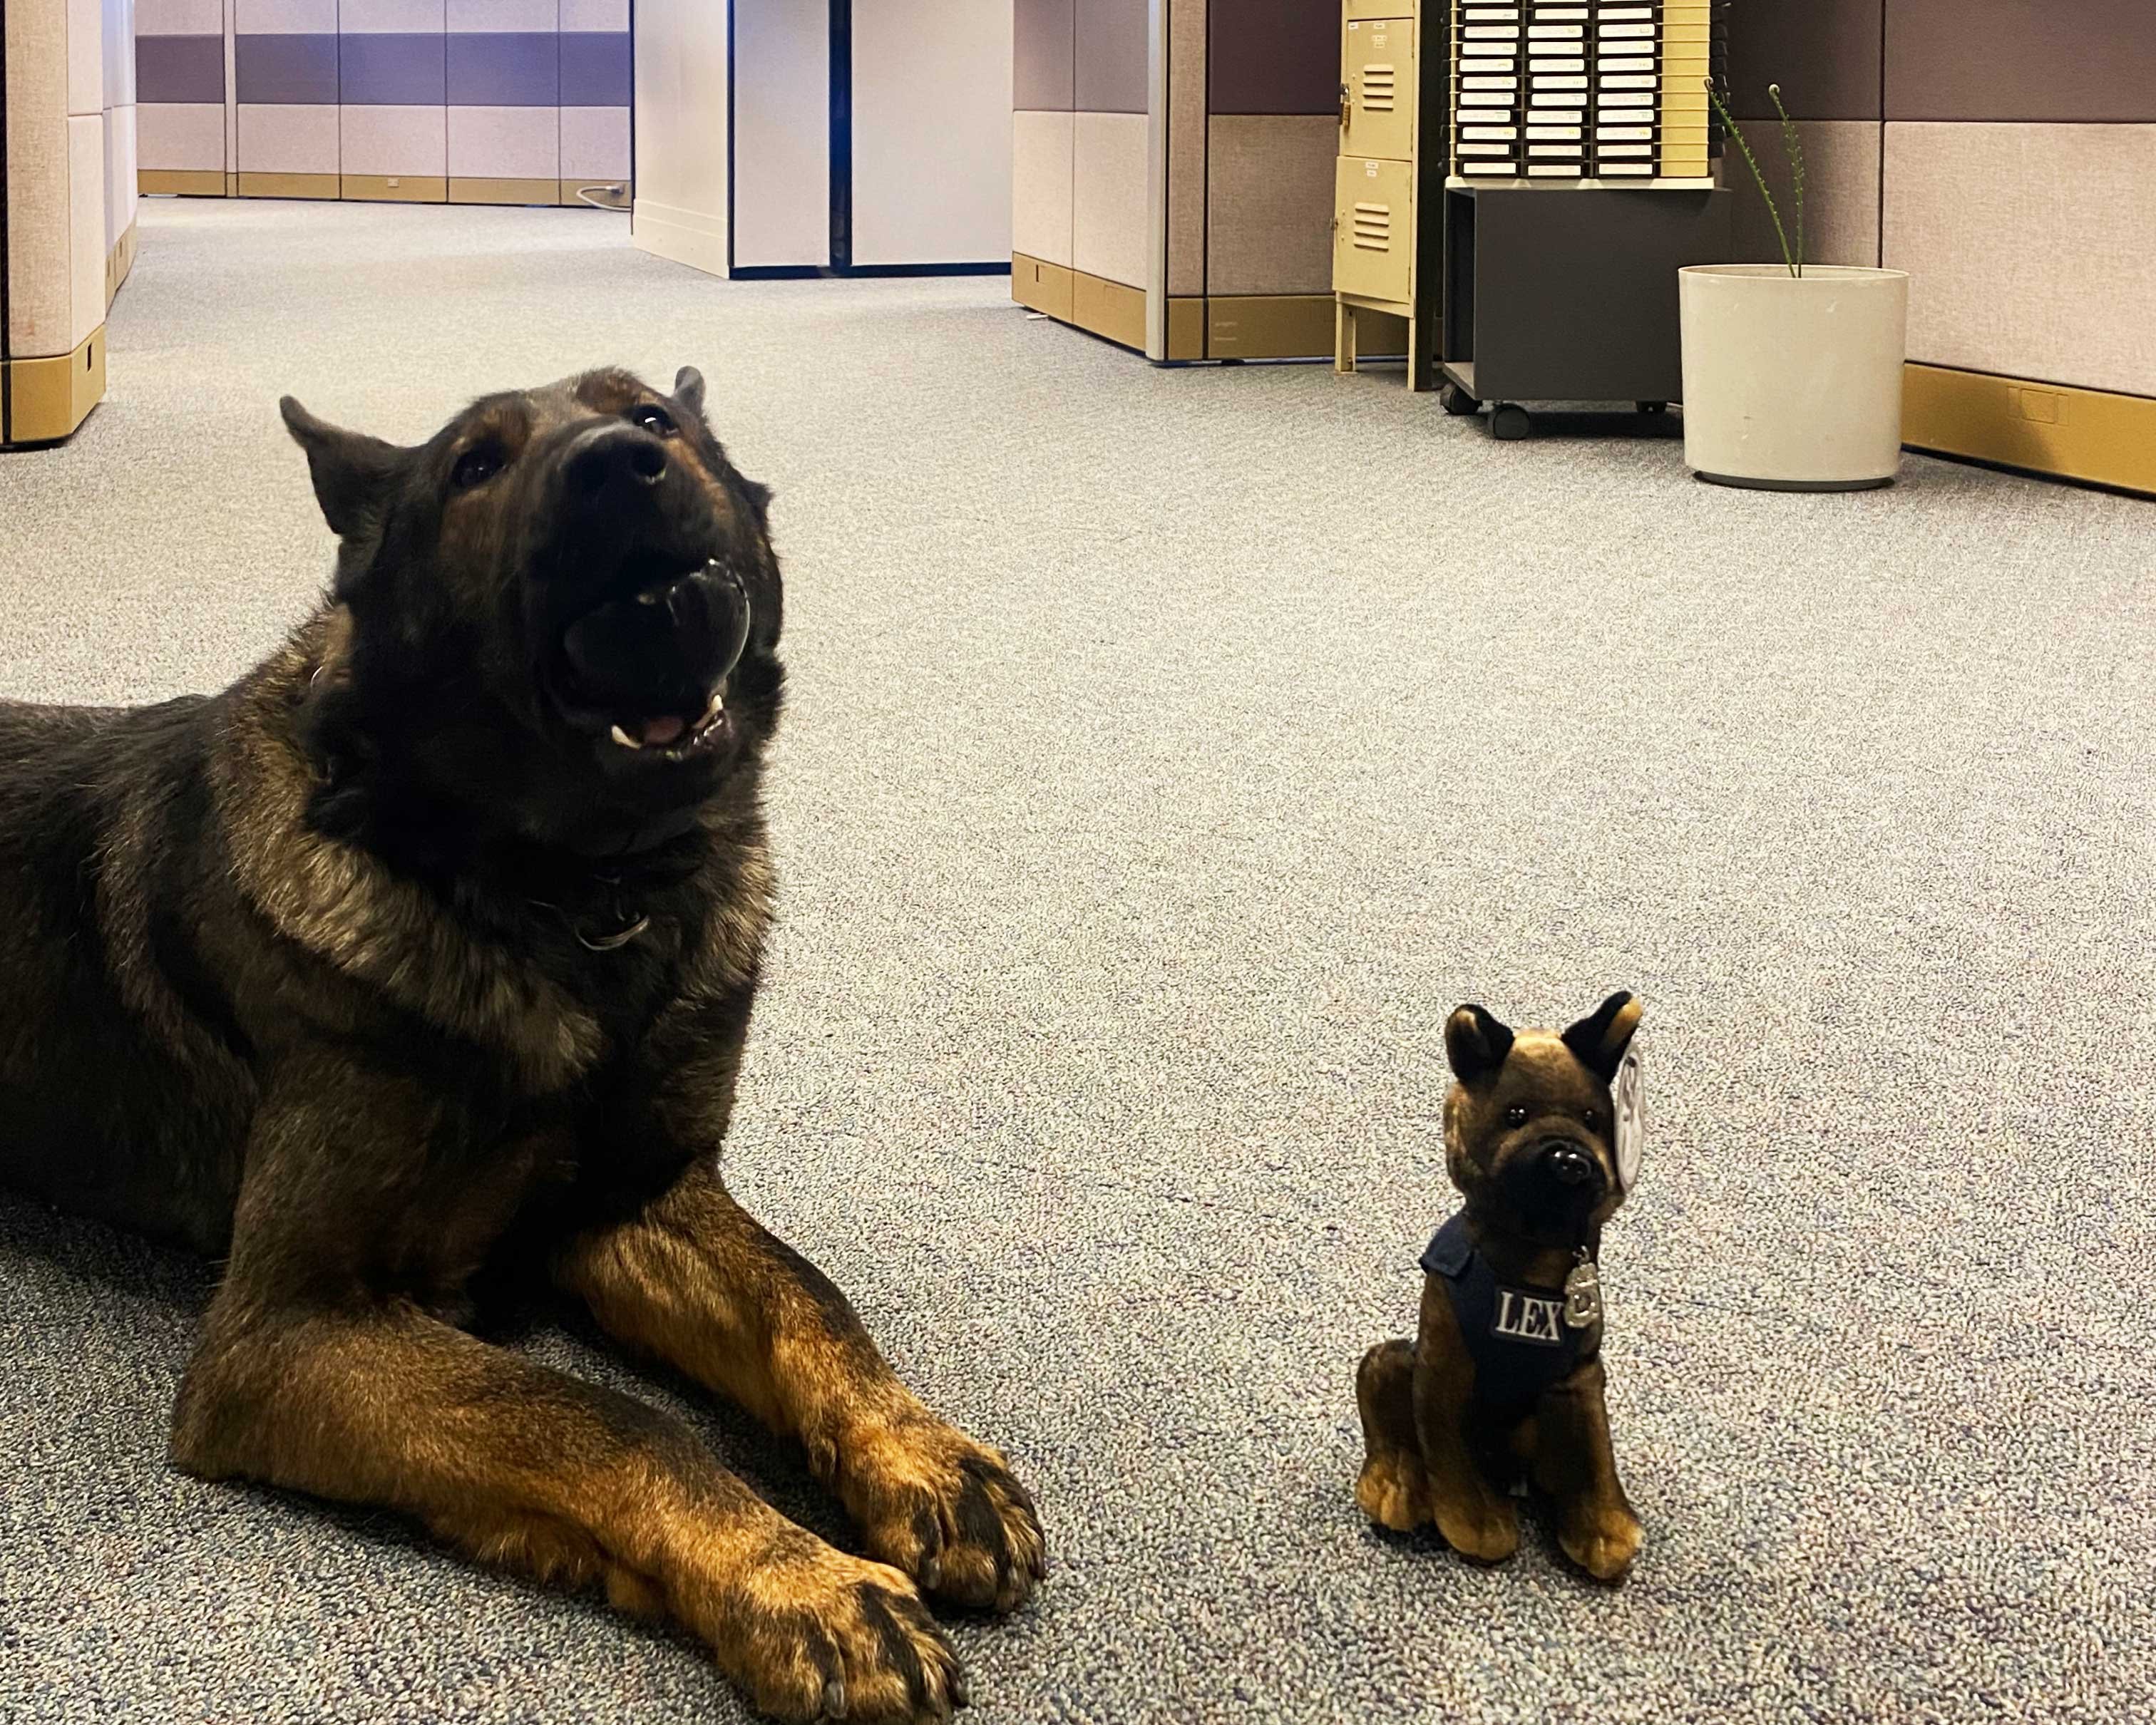  C.D. Smith Construction supports Fond du Lac Police K-9 Unit fundraiser with donations of plush toys for purchase by the community.